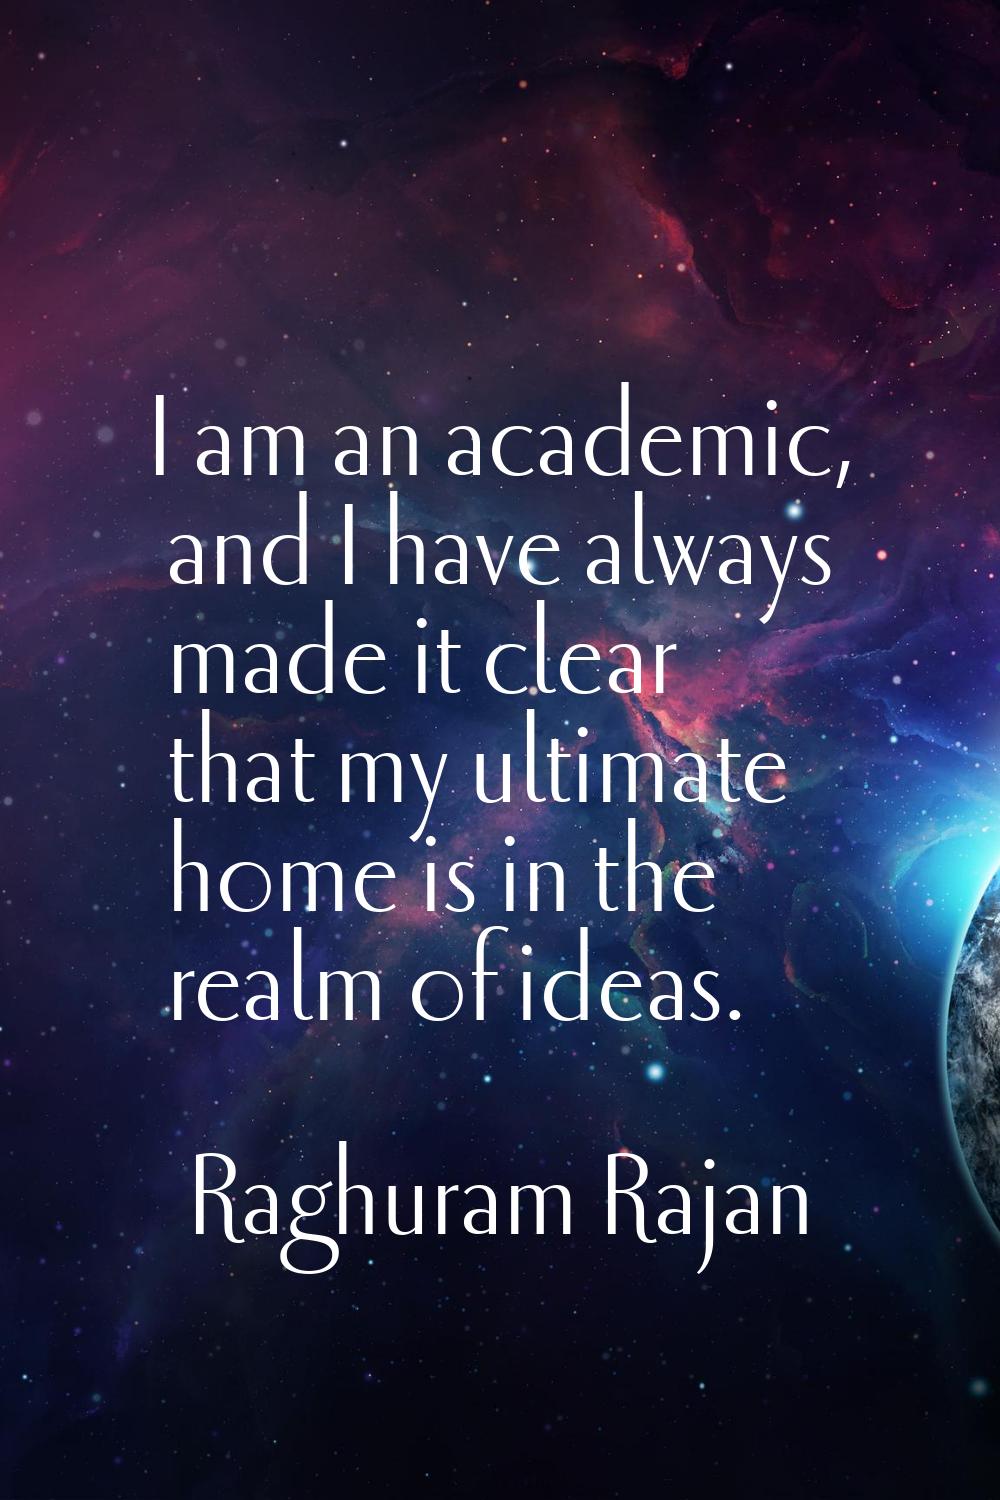 I am an academic, and I have always made it clear that my ultimate home is in the realm of ideas.